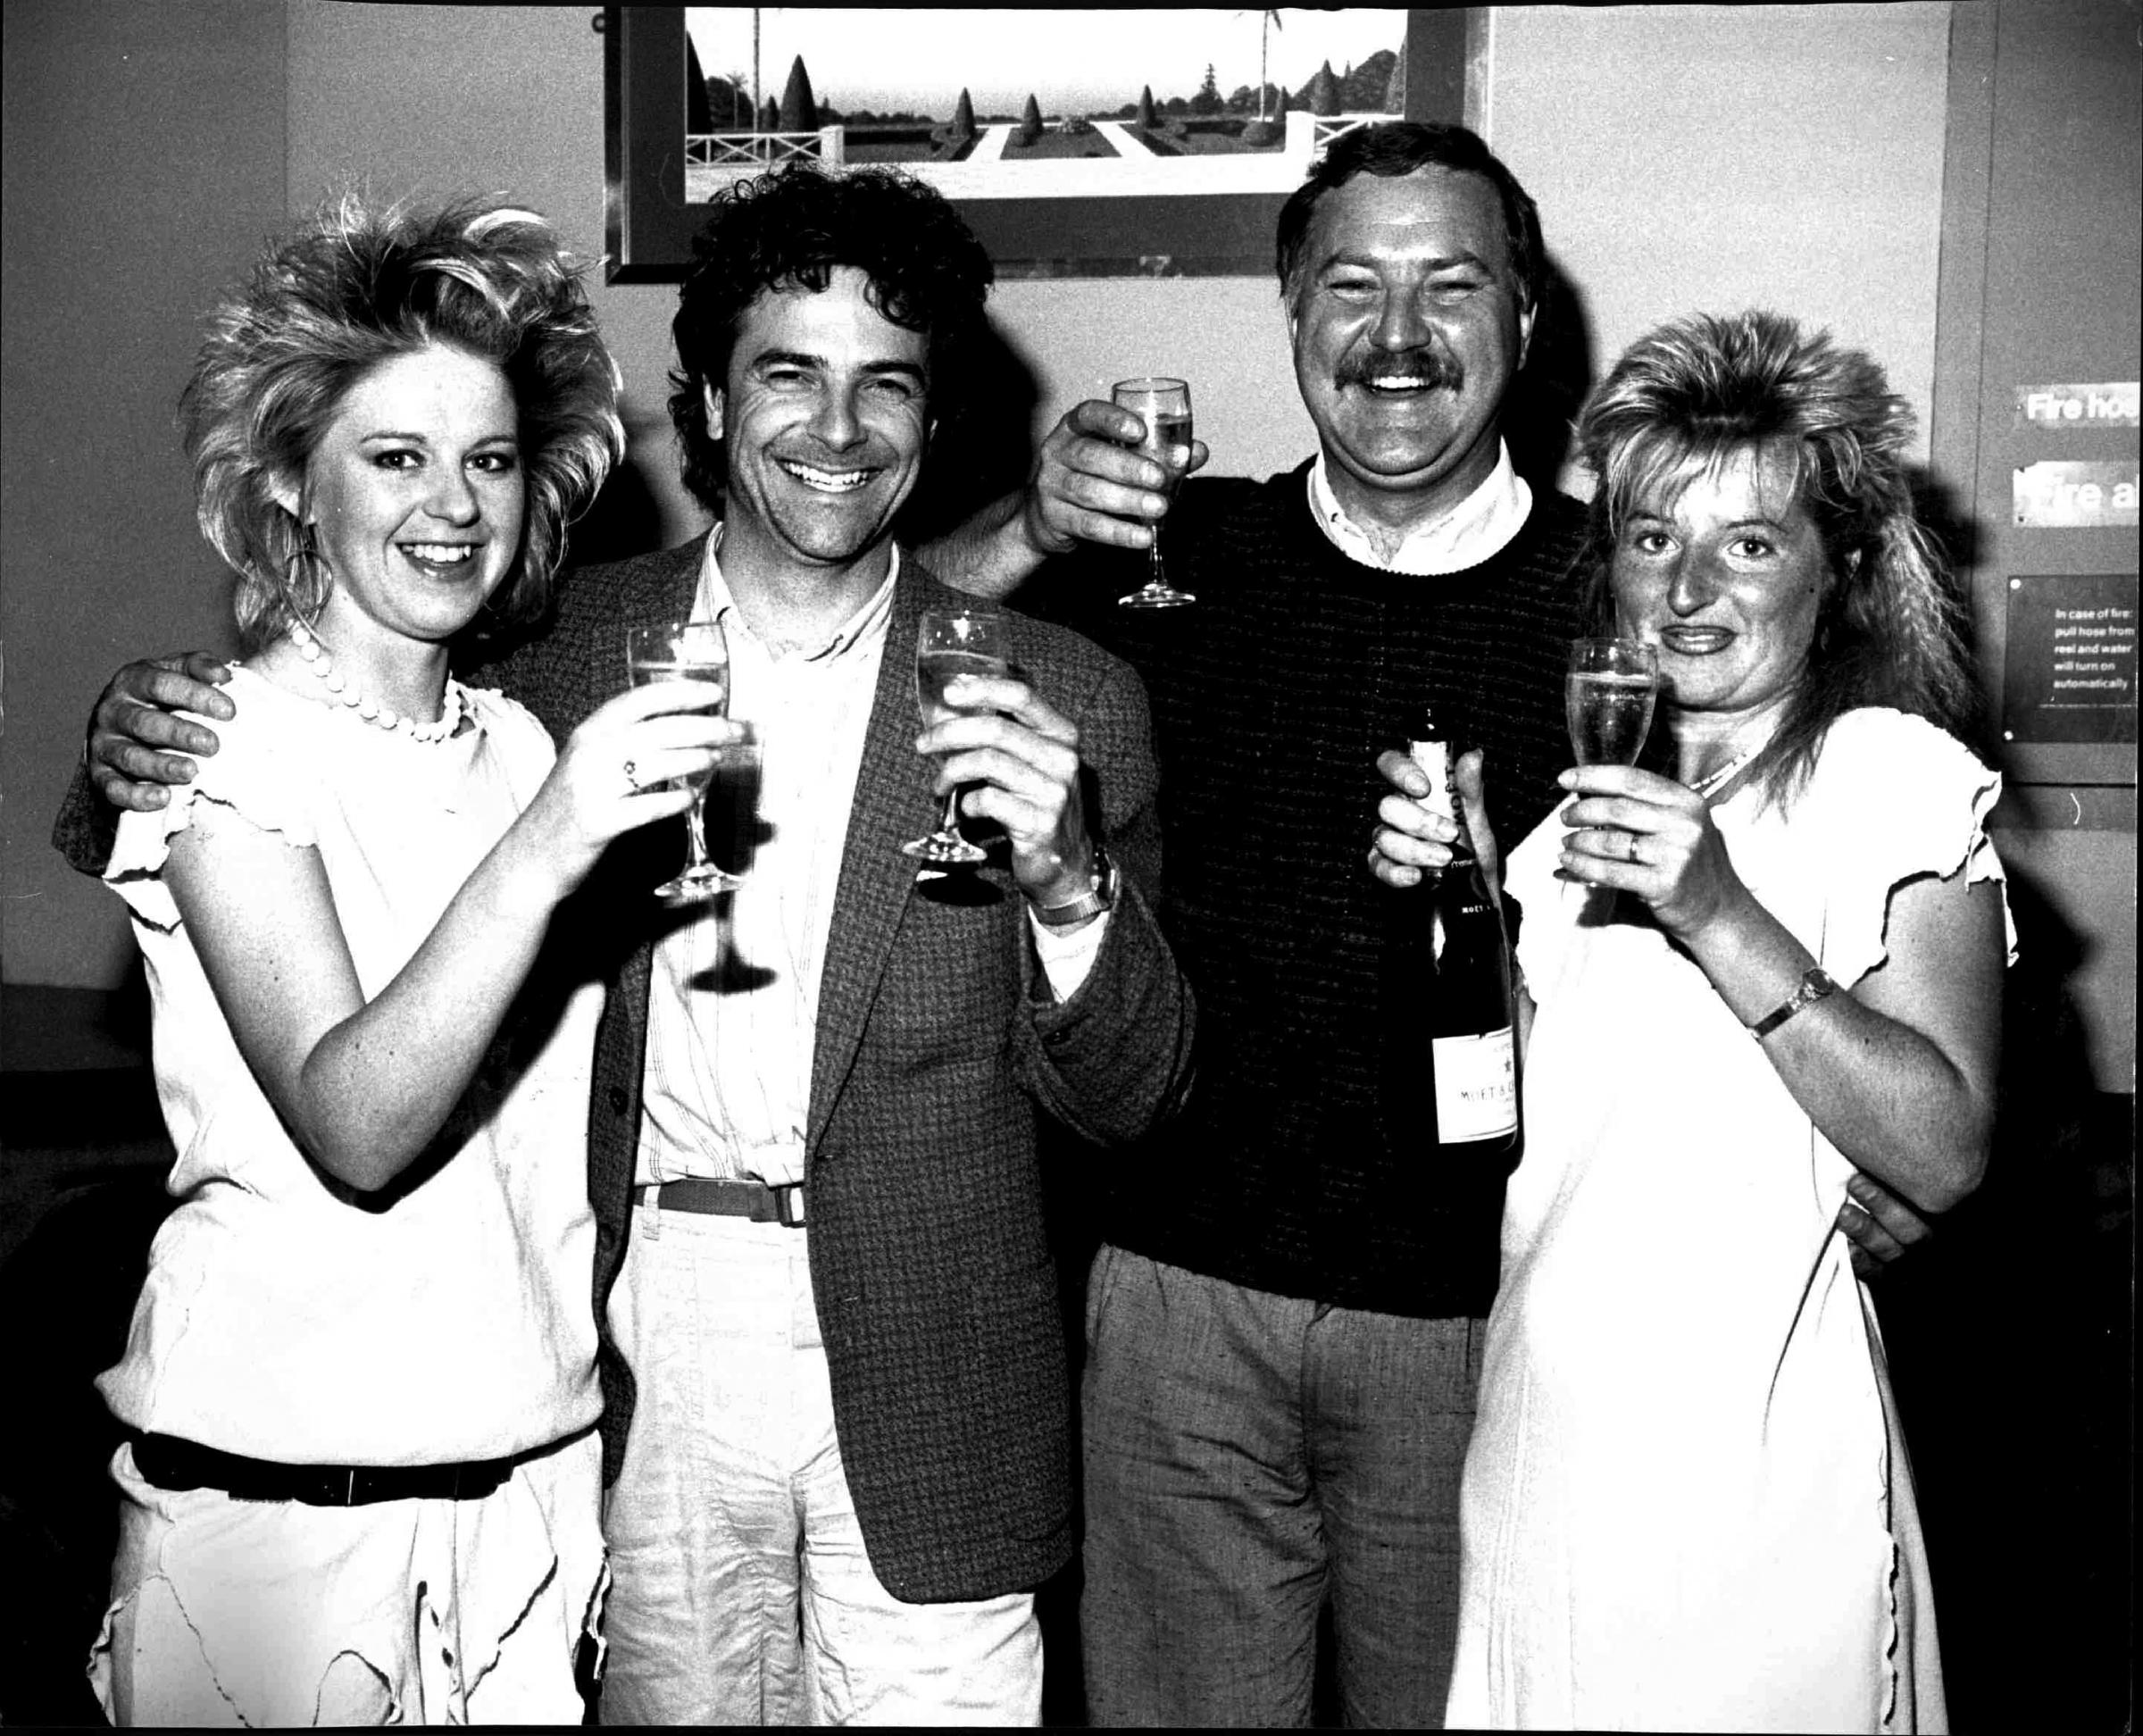 Hazel Evans, Brian Capron, Dave Rimmer, Sue Boswood at the Pink Coconut nightclub’s second anniversary celebrations in June 1985